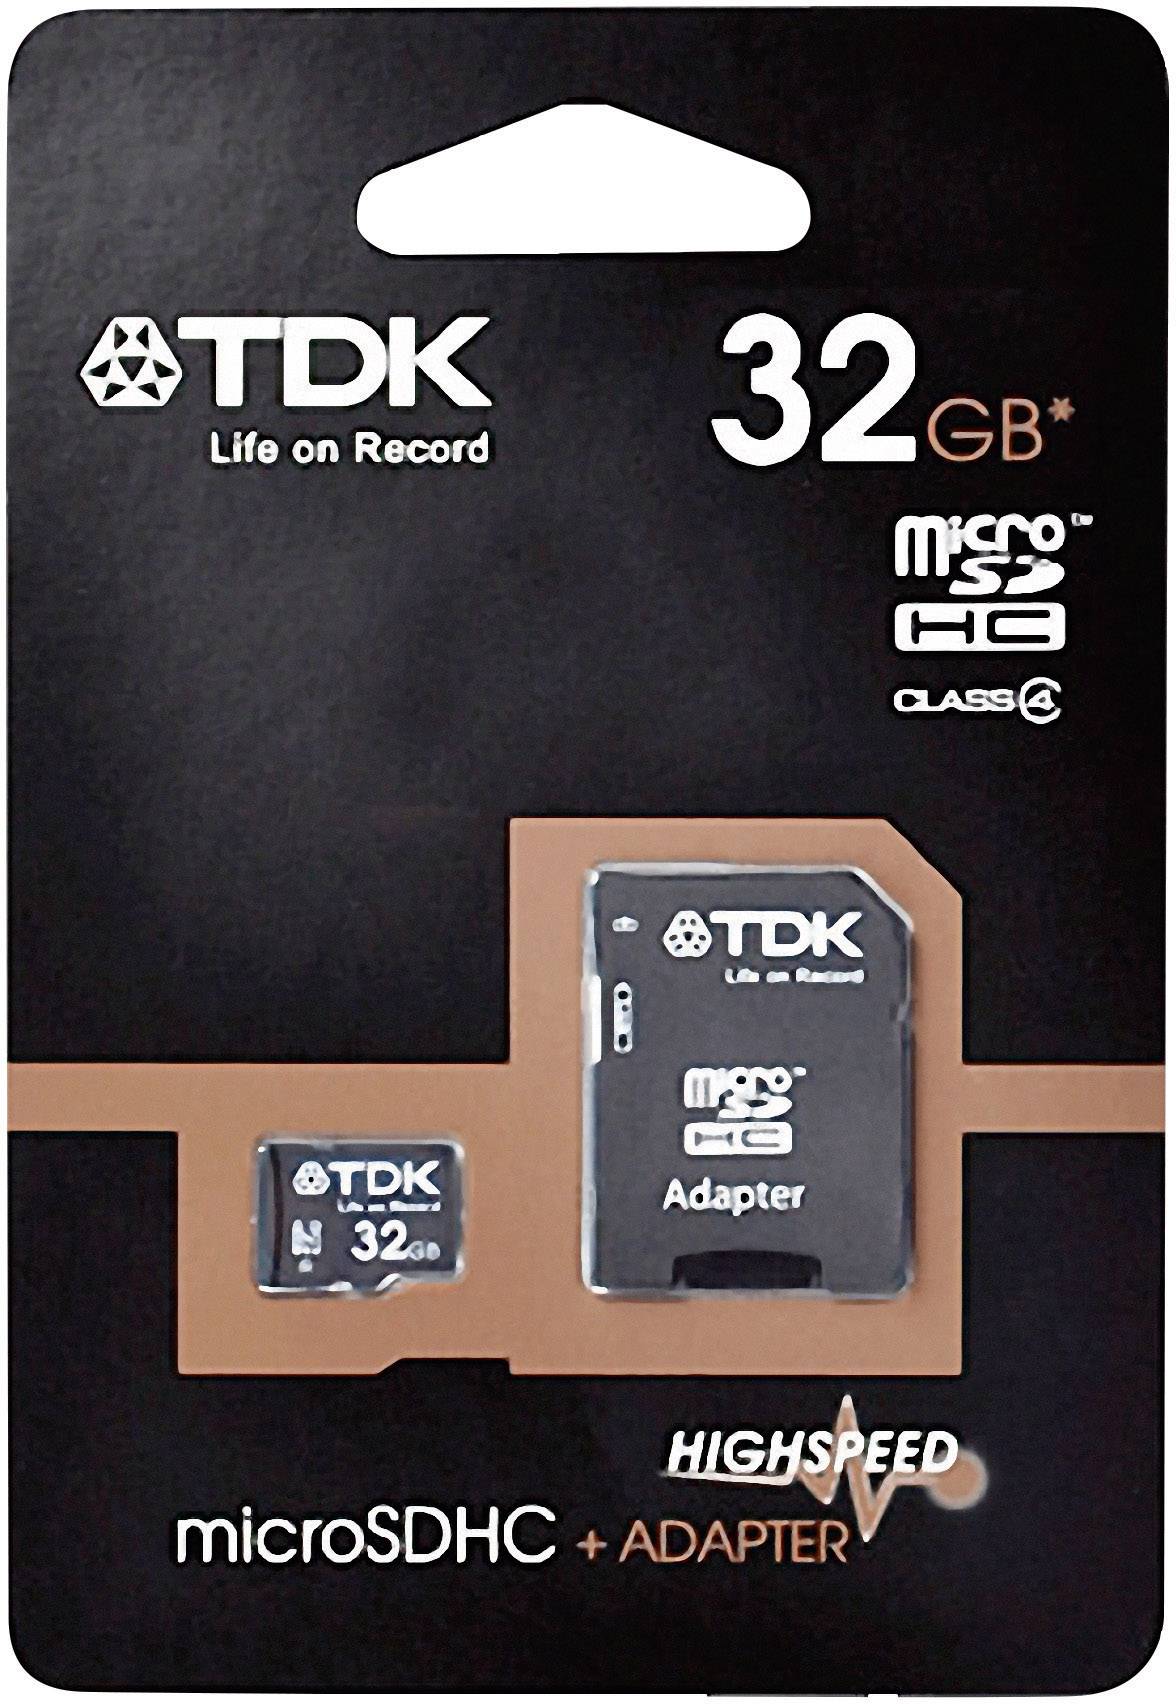 TDK 32GB Class 4 Micro SDHC Memory Card with Adapter